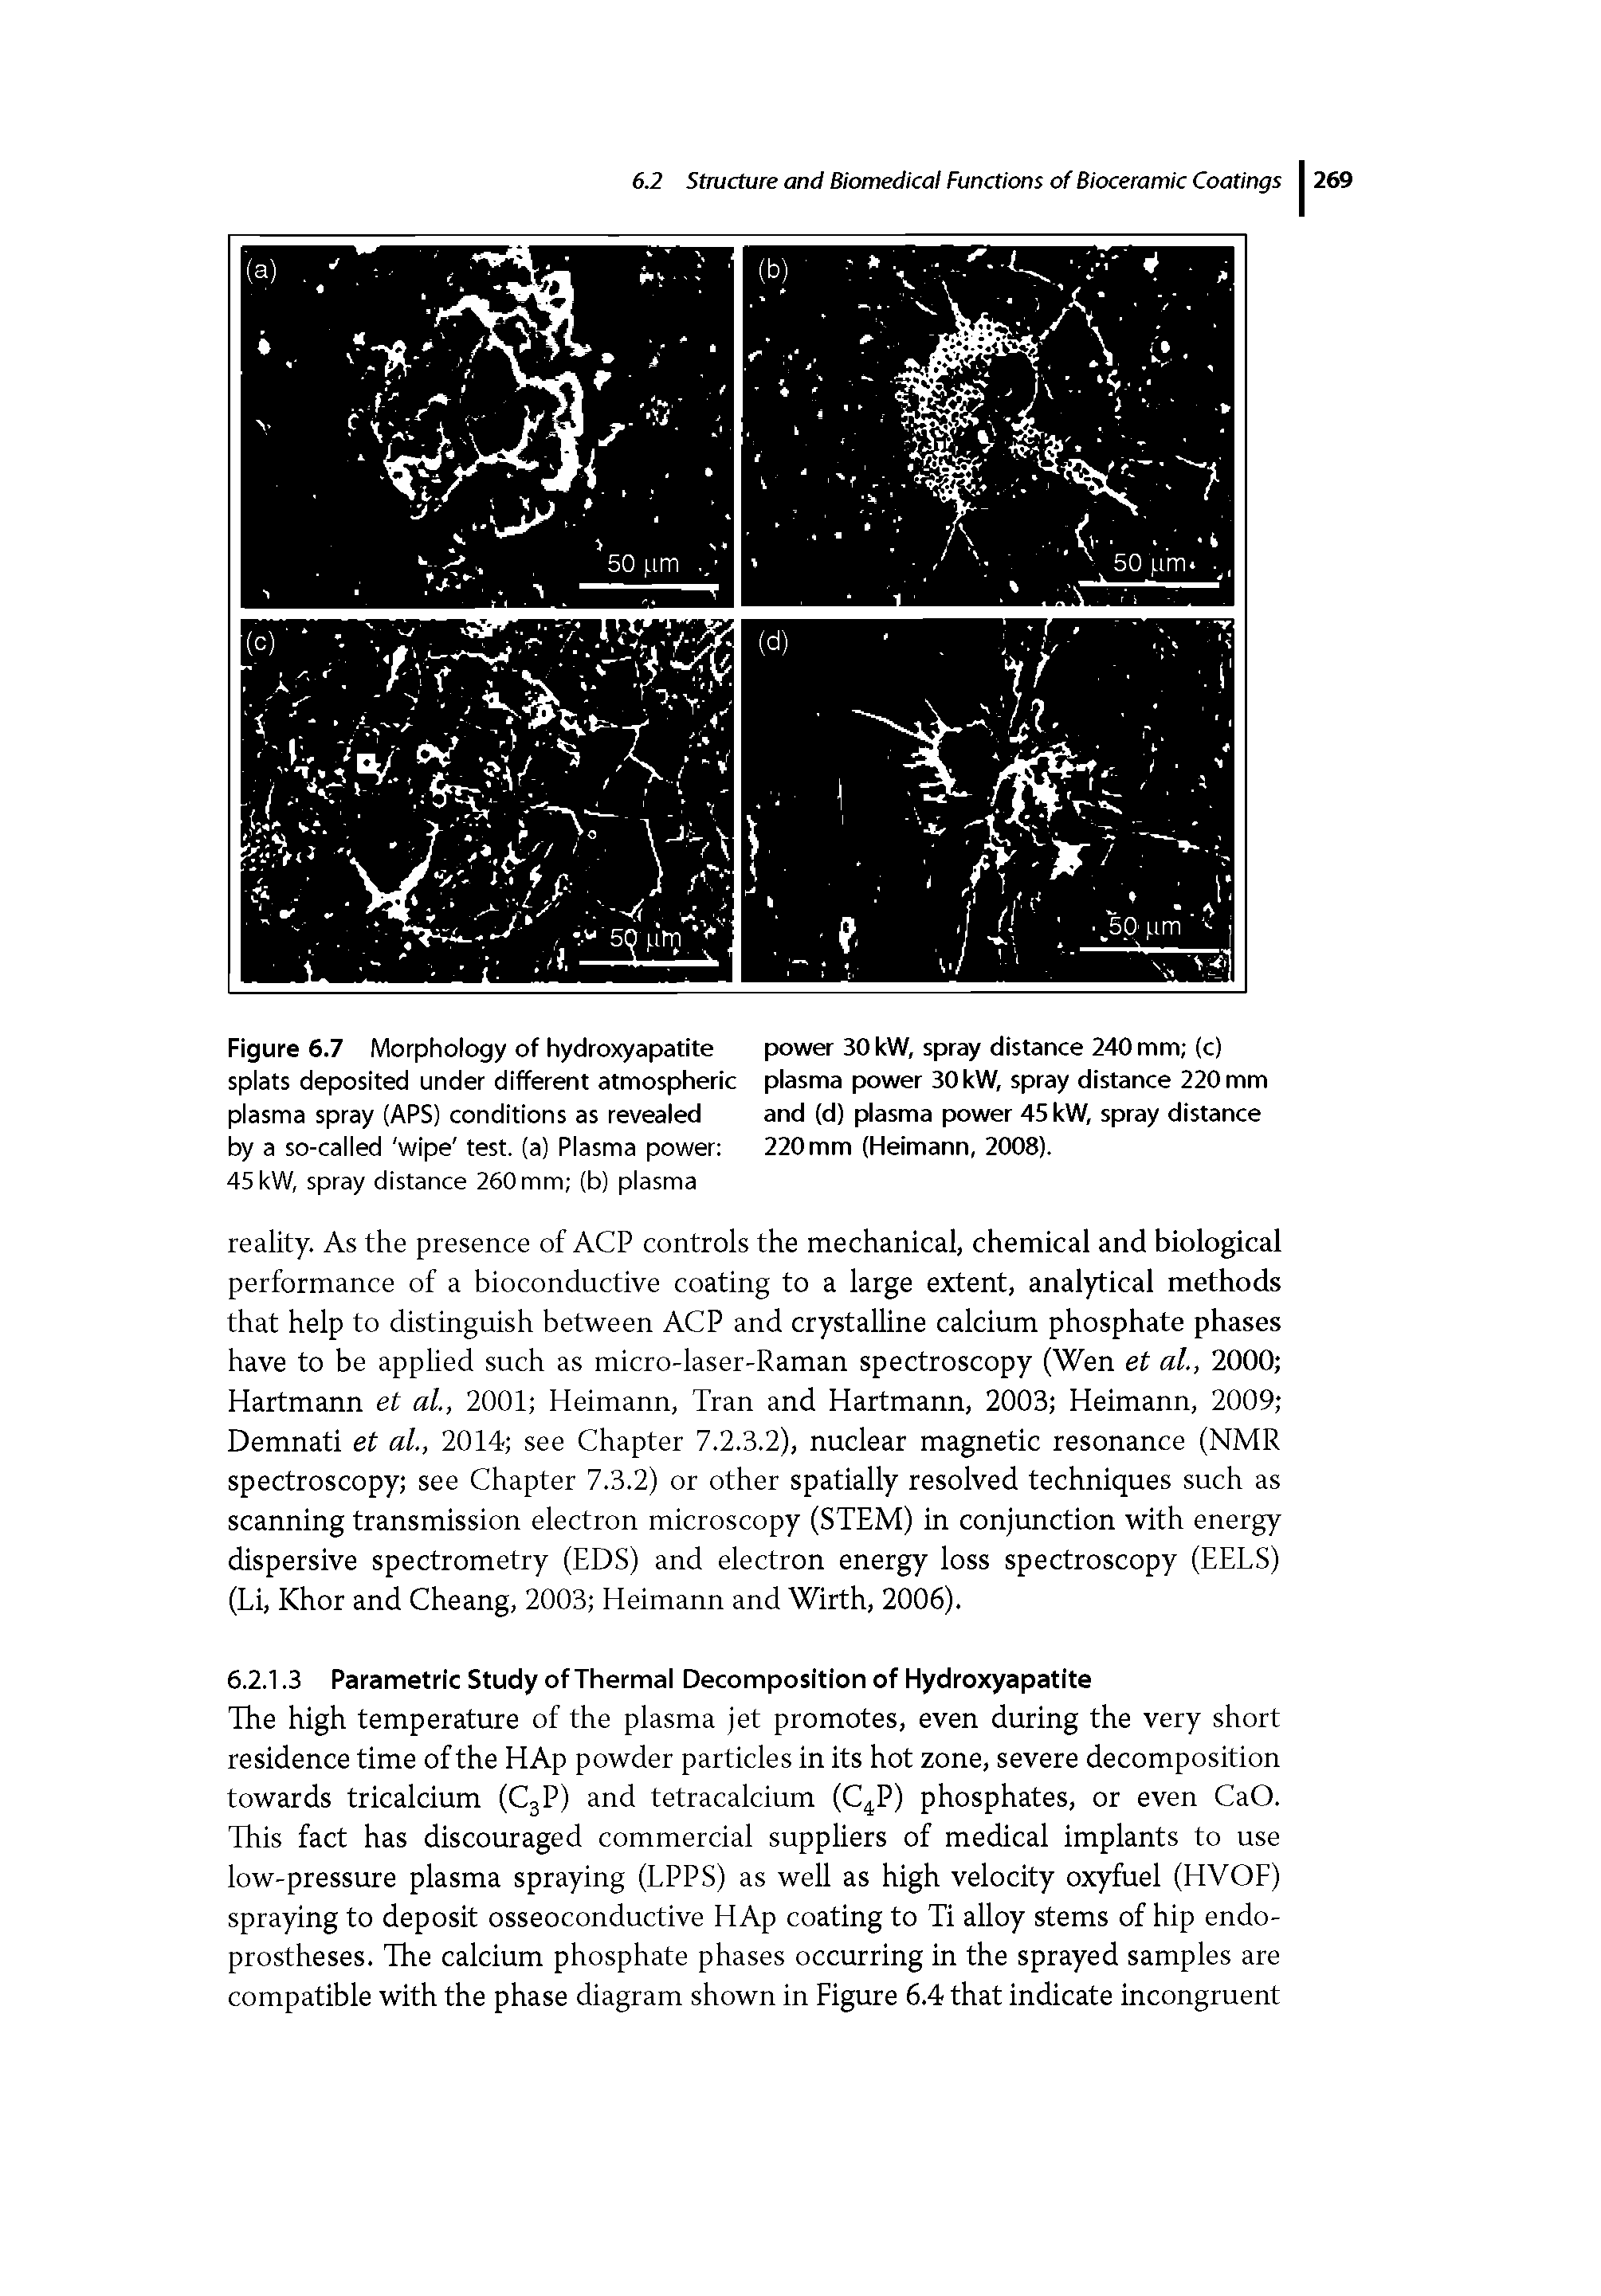 Figure 6.7 Morphology of hydroxyapatite power 30 kW, spray distance 240 mm (c) splats deposited under different atmospheric plasma power 30kW, spray distance 220 mm plasma spray (APS) conditions as revealed and (d) plasma power 45 kW, spray distance by a so-called wipe test, (a) Plasma power 220mm (Heimann, 2008).